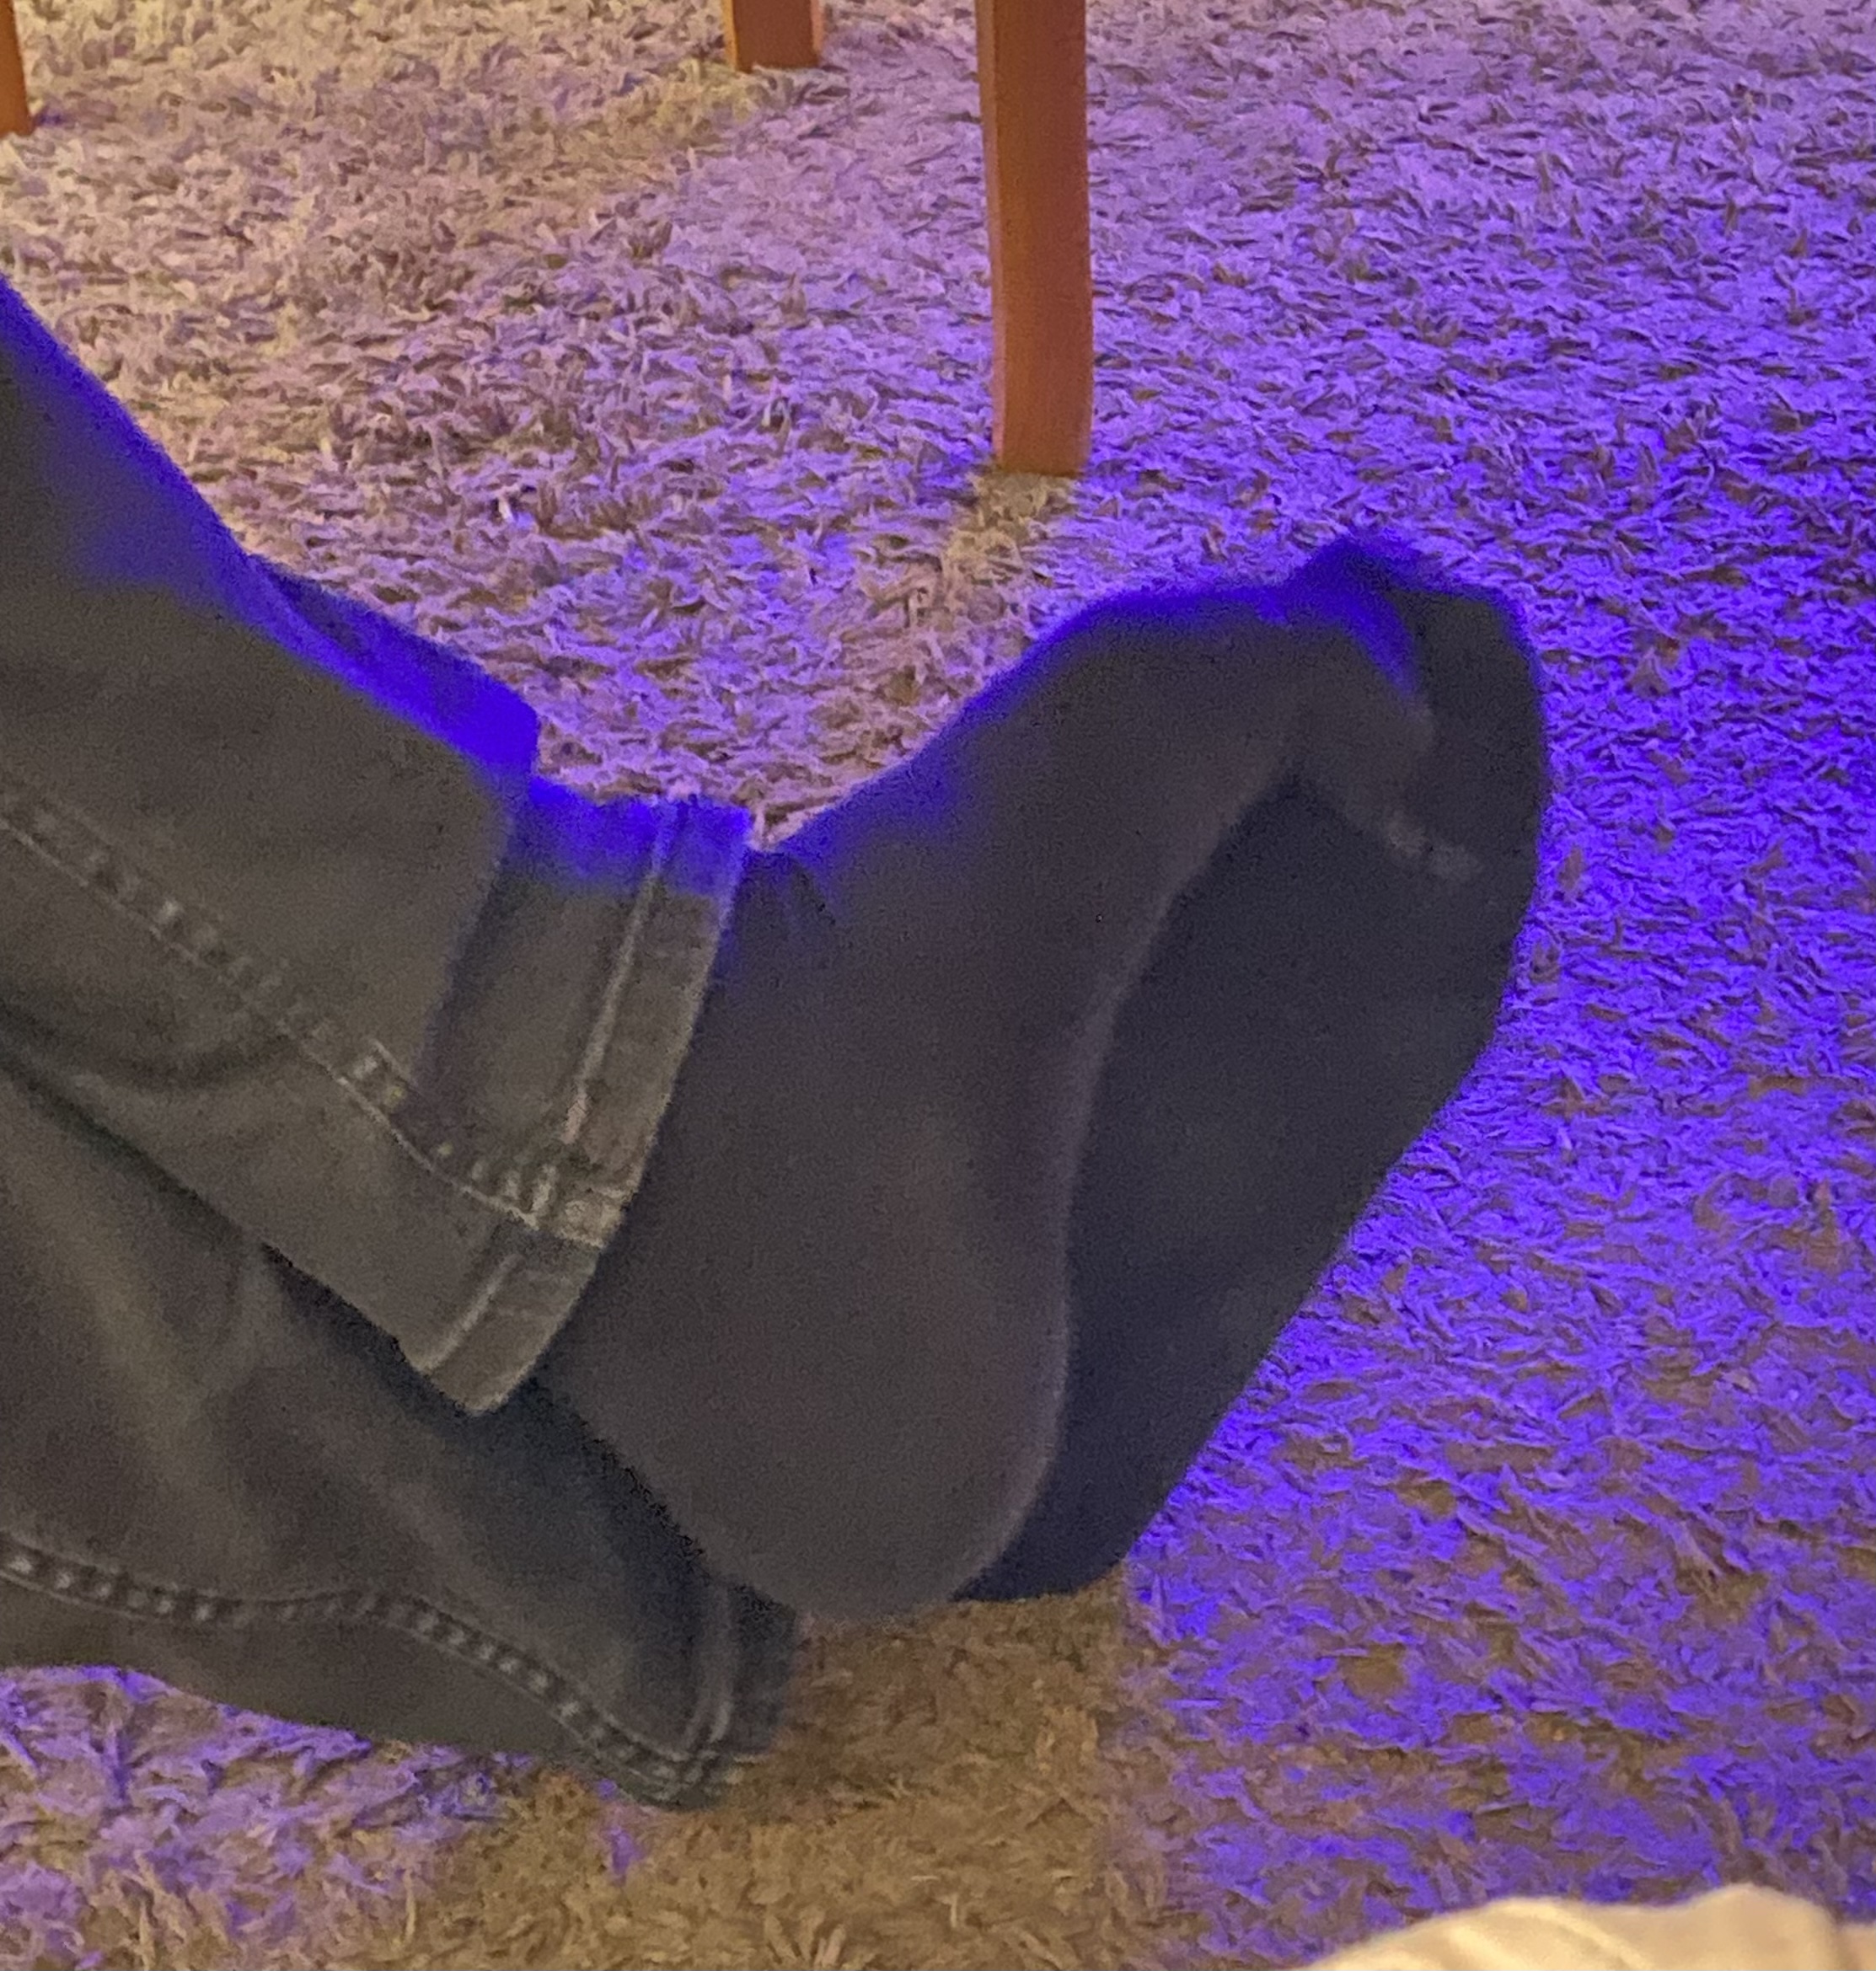 my uncle's black hot socks swinging under the table.